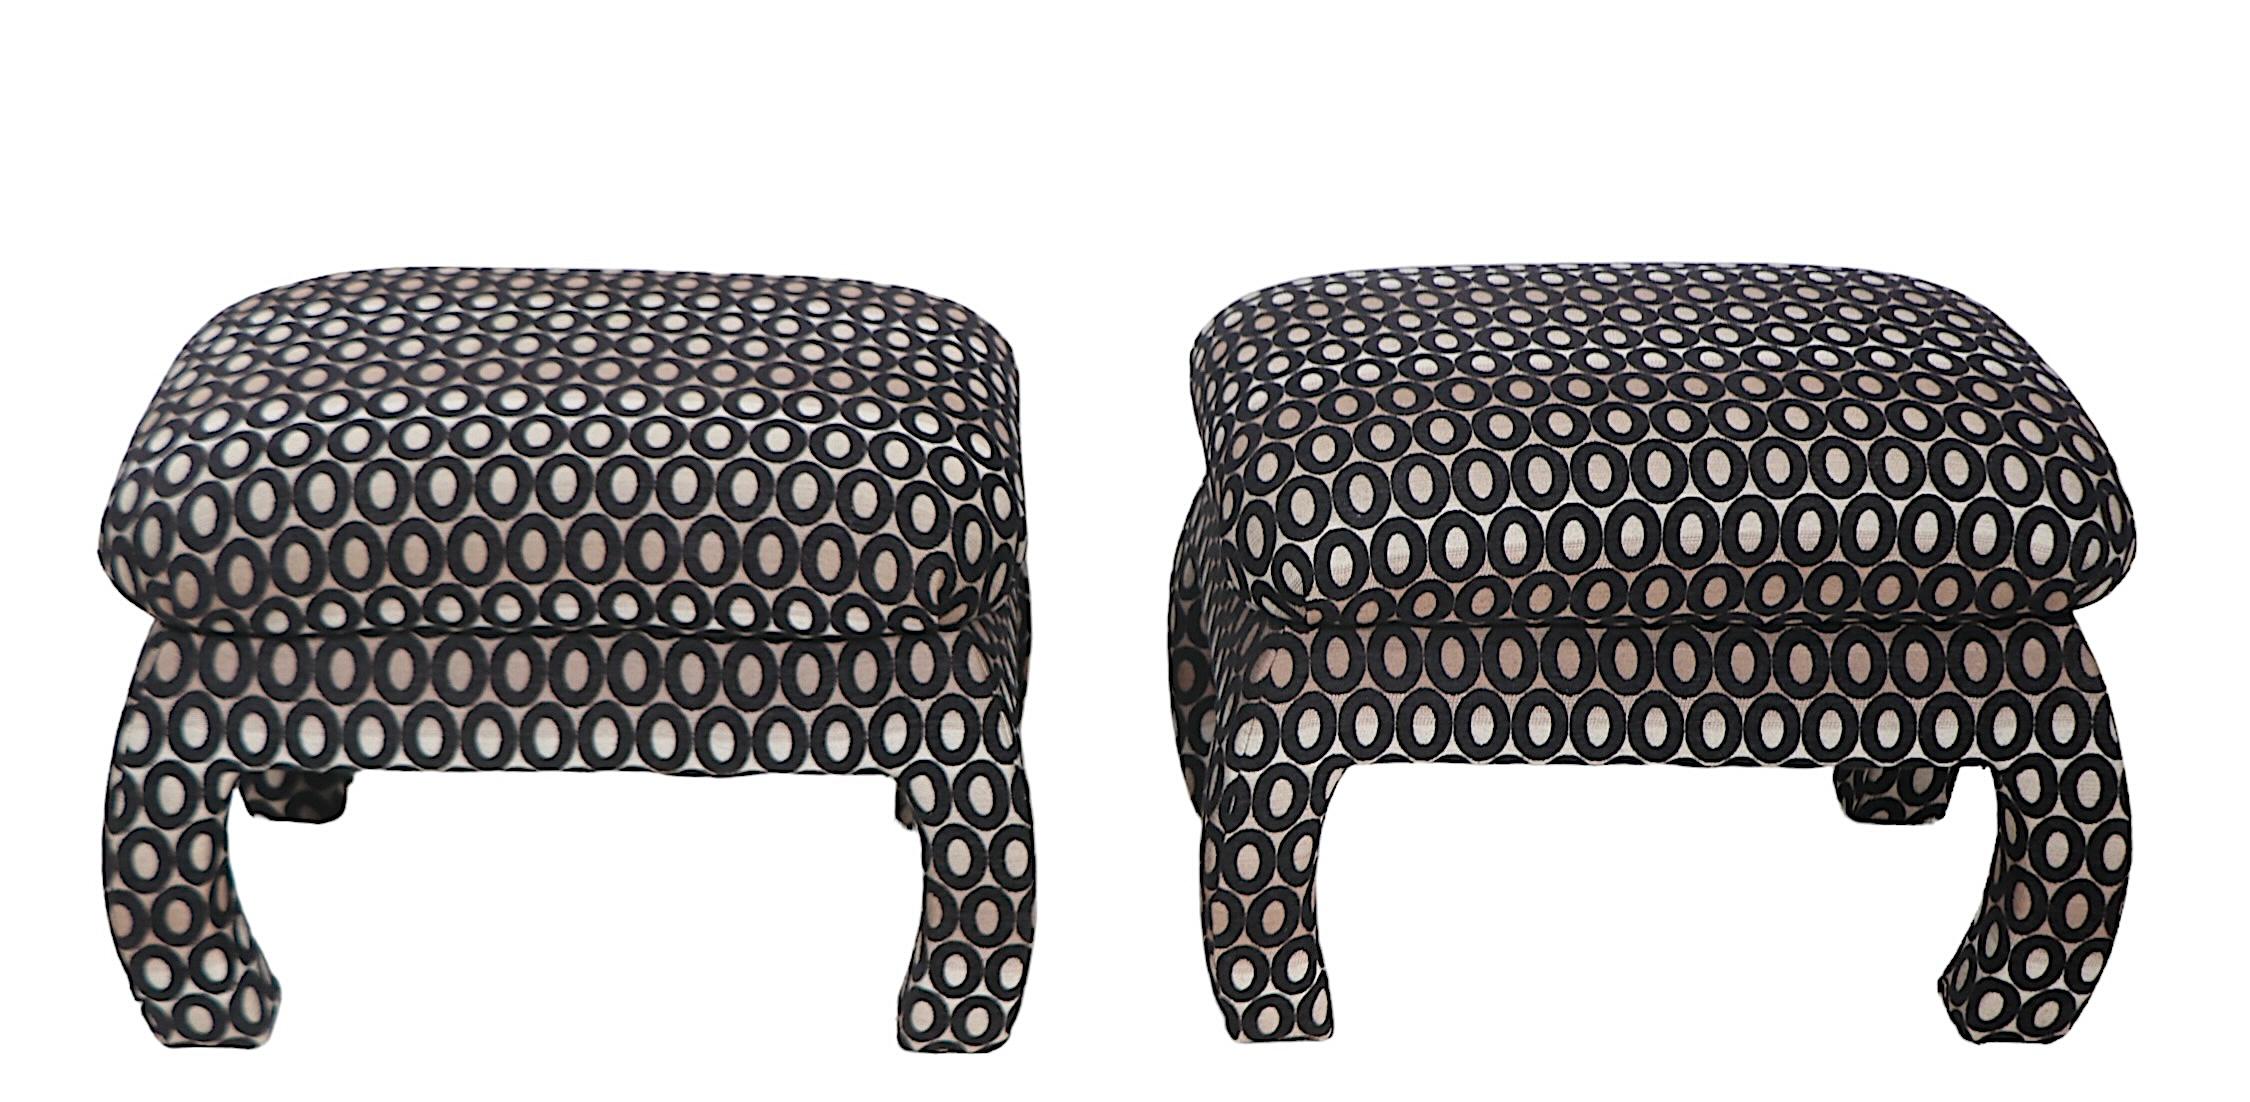 Mod Pr. of  Upholstered Stools Ottomans Benches c 1970/1980's  In Good Condition For Sale In New York, NY